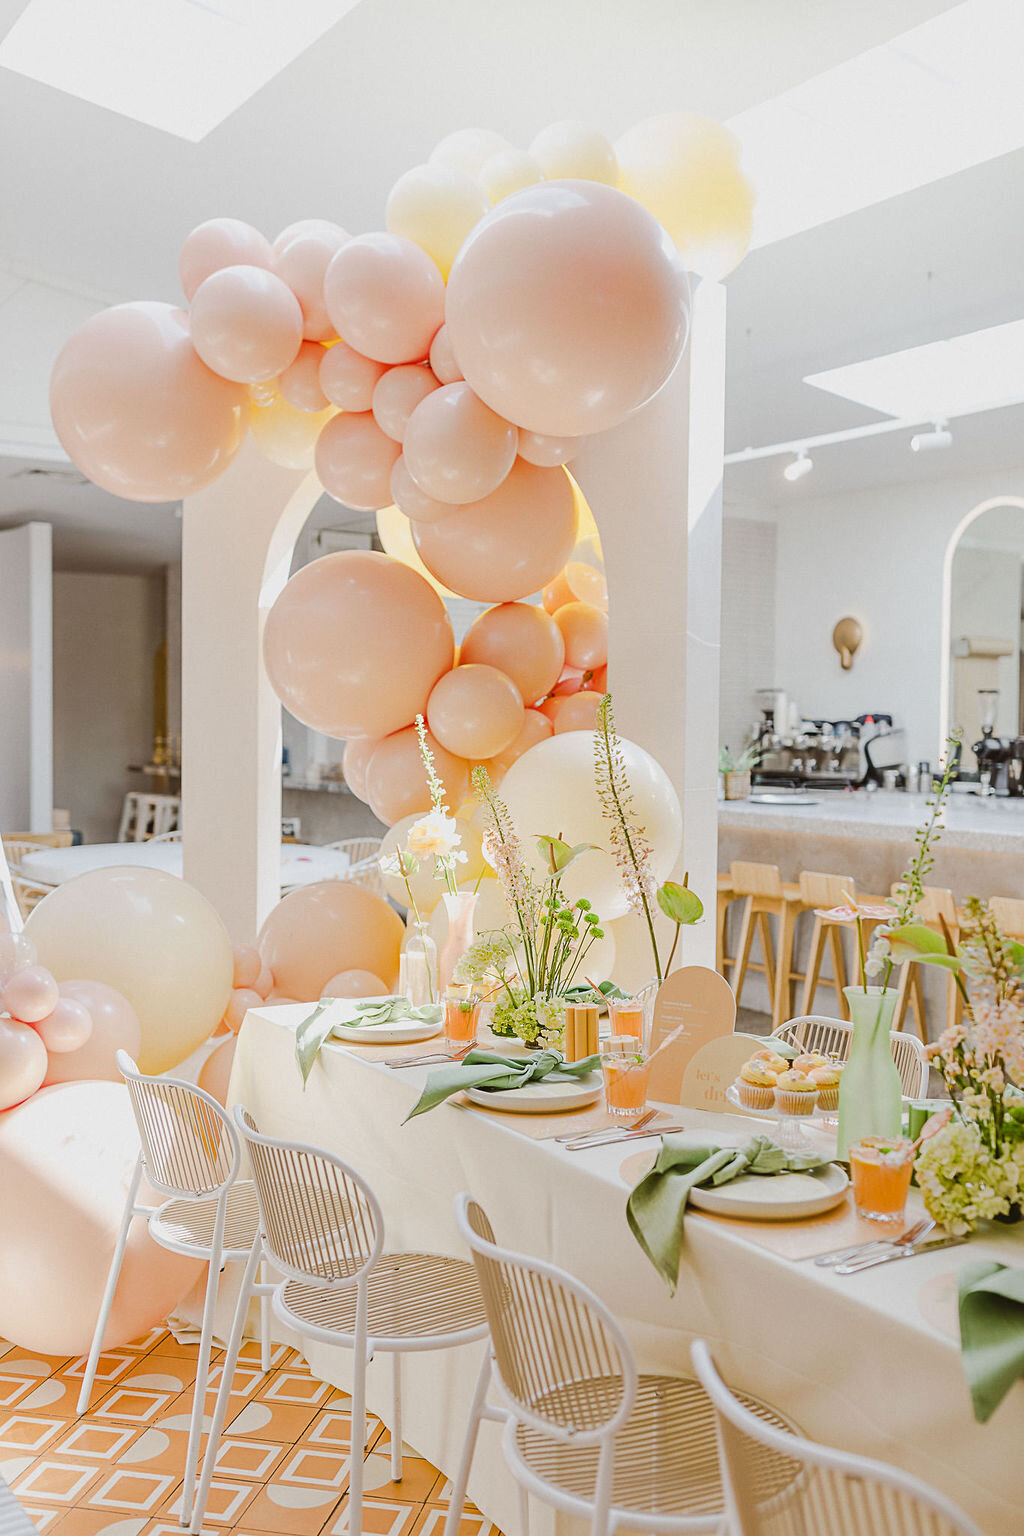 A bright table setting. Four chairs face a full table with avocado green tied napkins on plates, orange cocktails, green florals down the middle of the table and an arch next to the table. A flowing light peach and cream balloon garland stretches past the table.
Nothing says ‘celebration’ like a pretty pastel balloon arch! Blowout Balloons hit the brief with their perfectly colour matching, free flowing, breath-taking balloon arch that flowed effortlessly throughout the space.